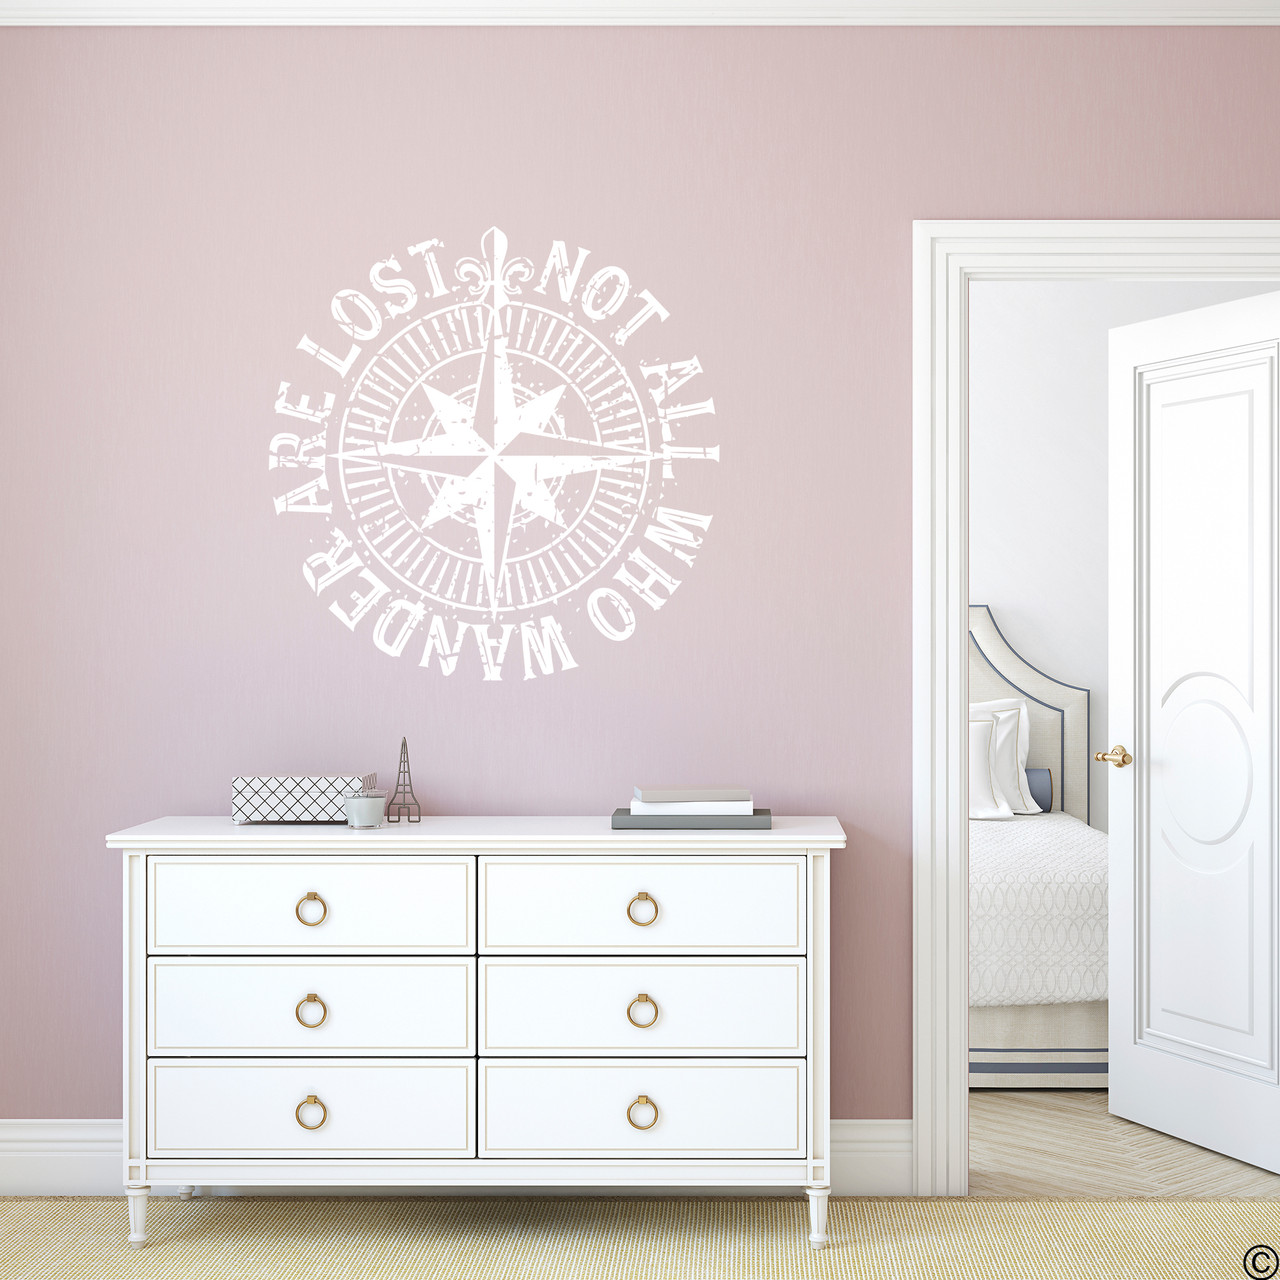 The "Not all who wander are lost" distressed compass rose wall decal shown here in white vinyl.